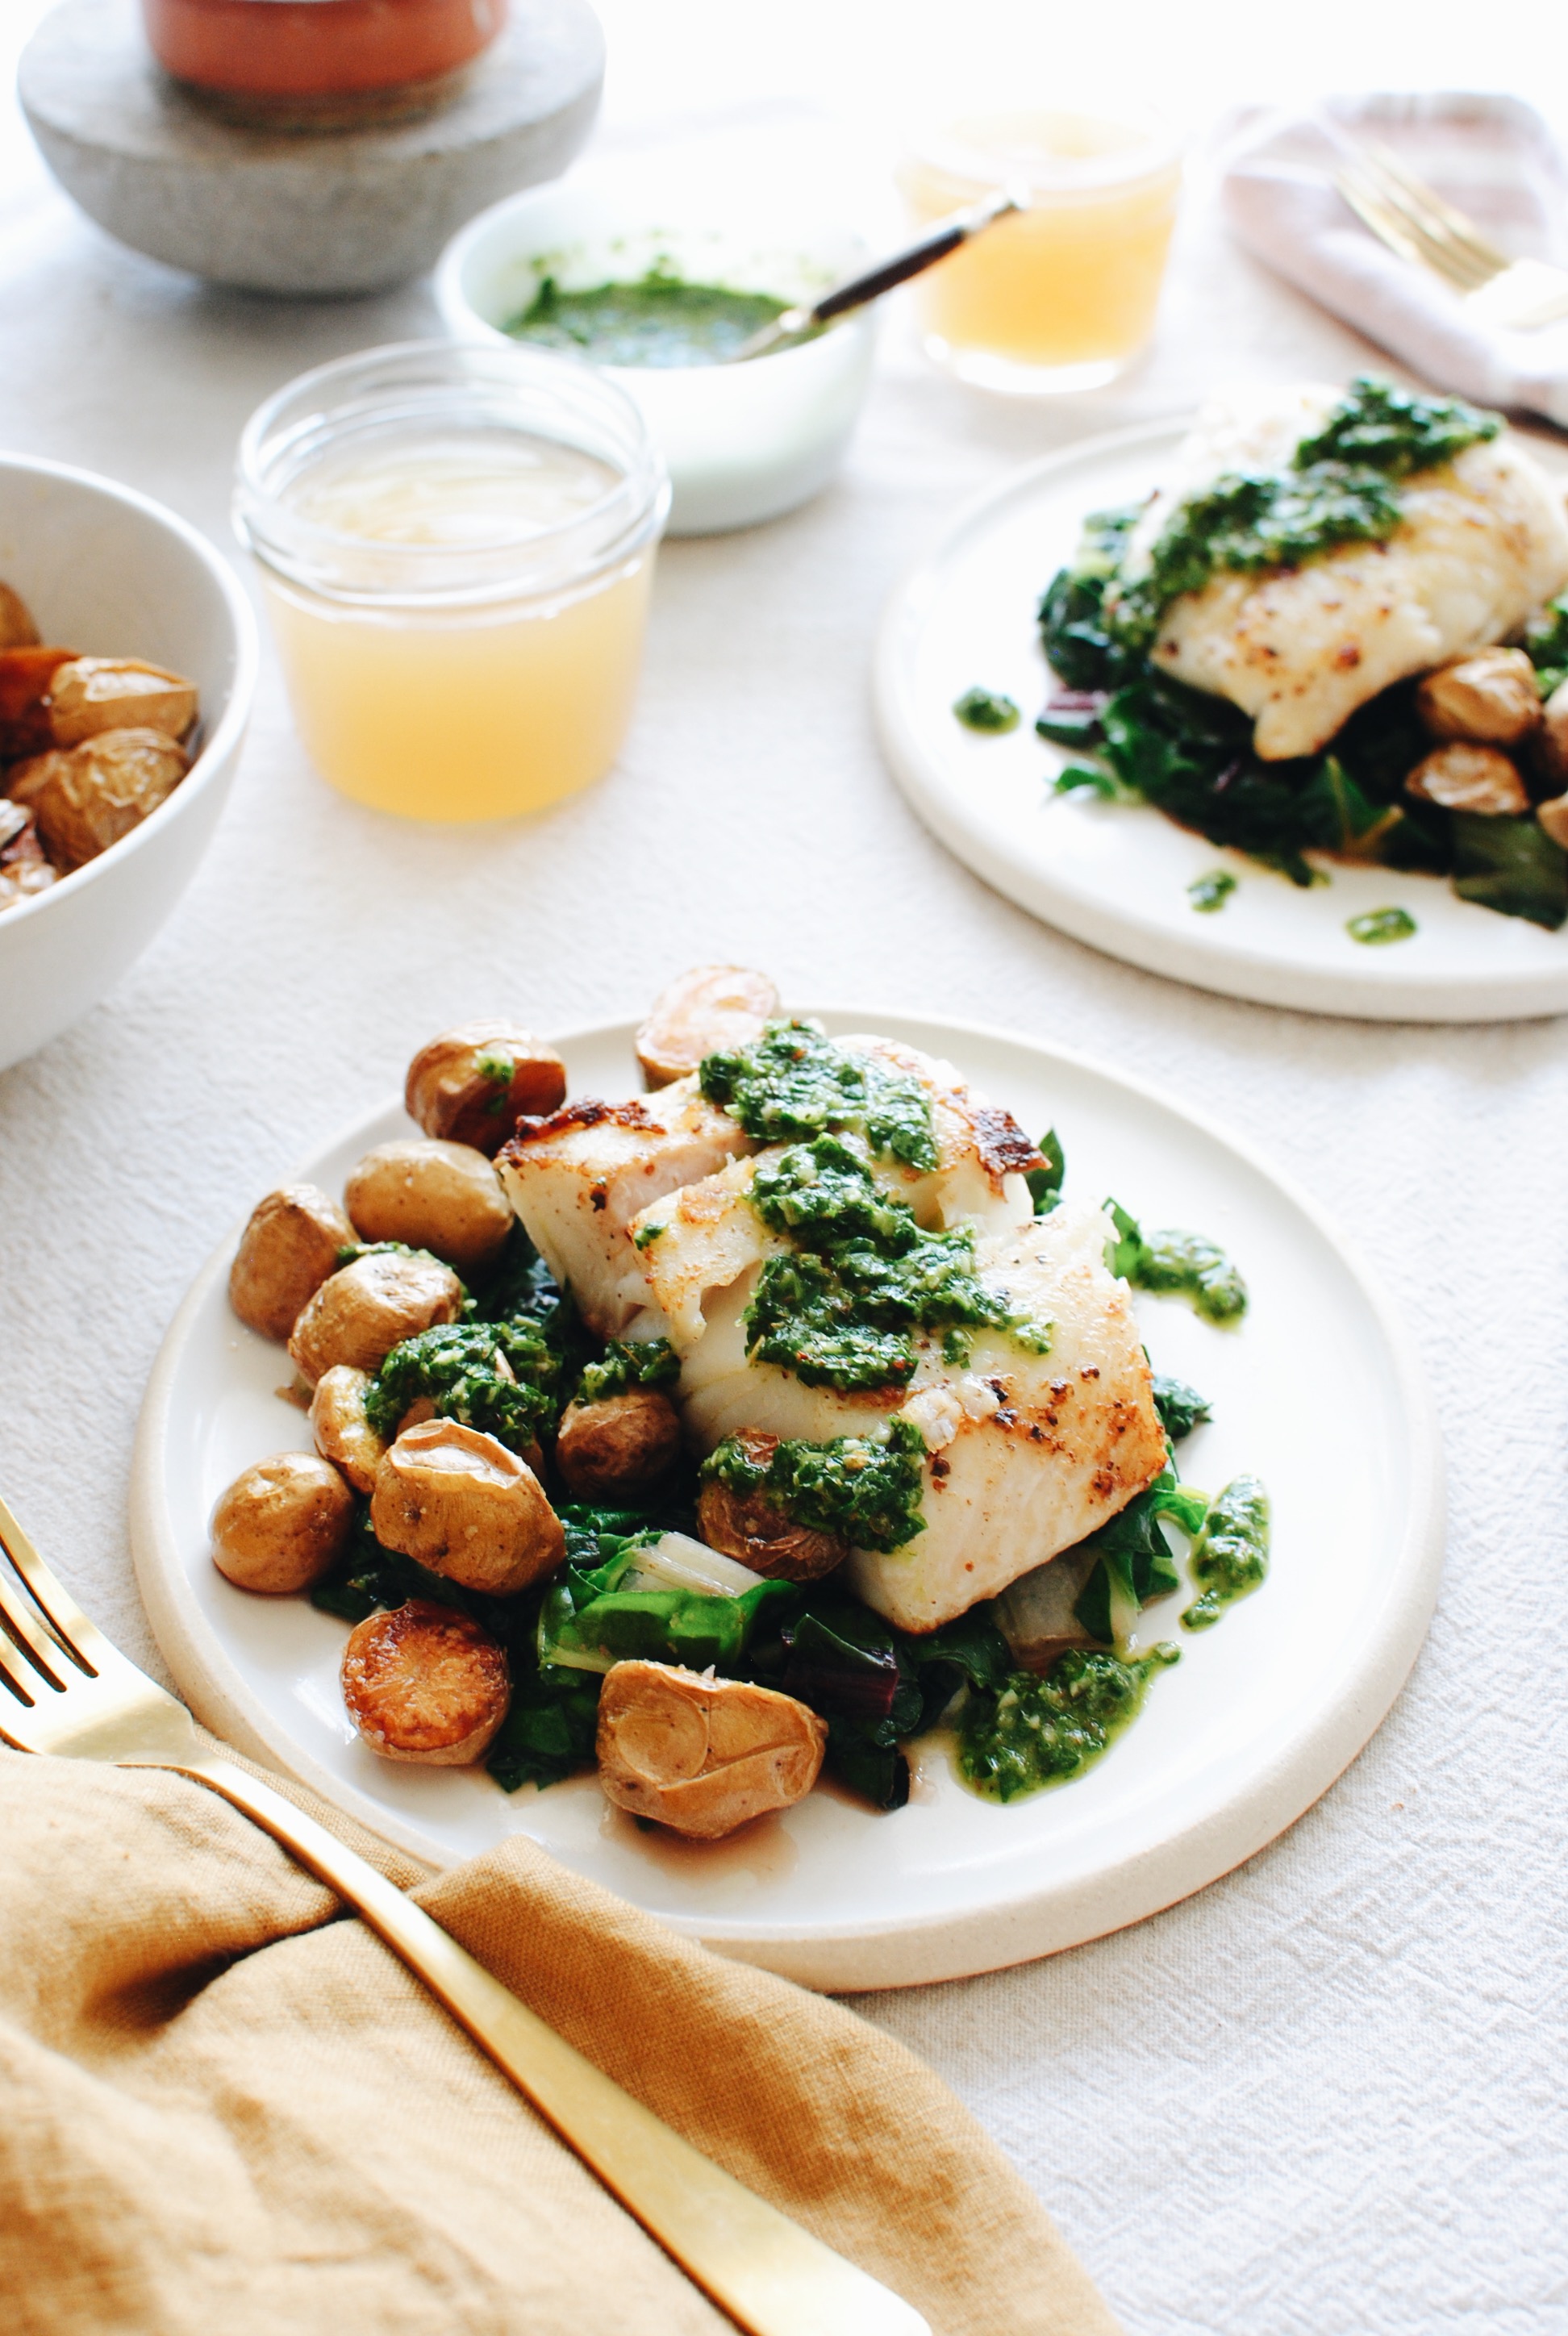 Halibut with Roasted Potatoes, Swiss Chard and a Chimichurri Sauce / Bev Cooks